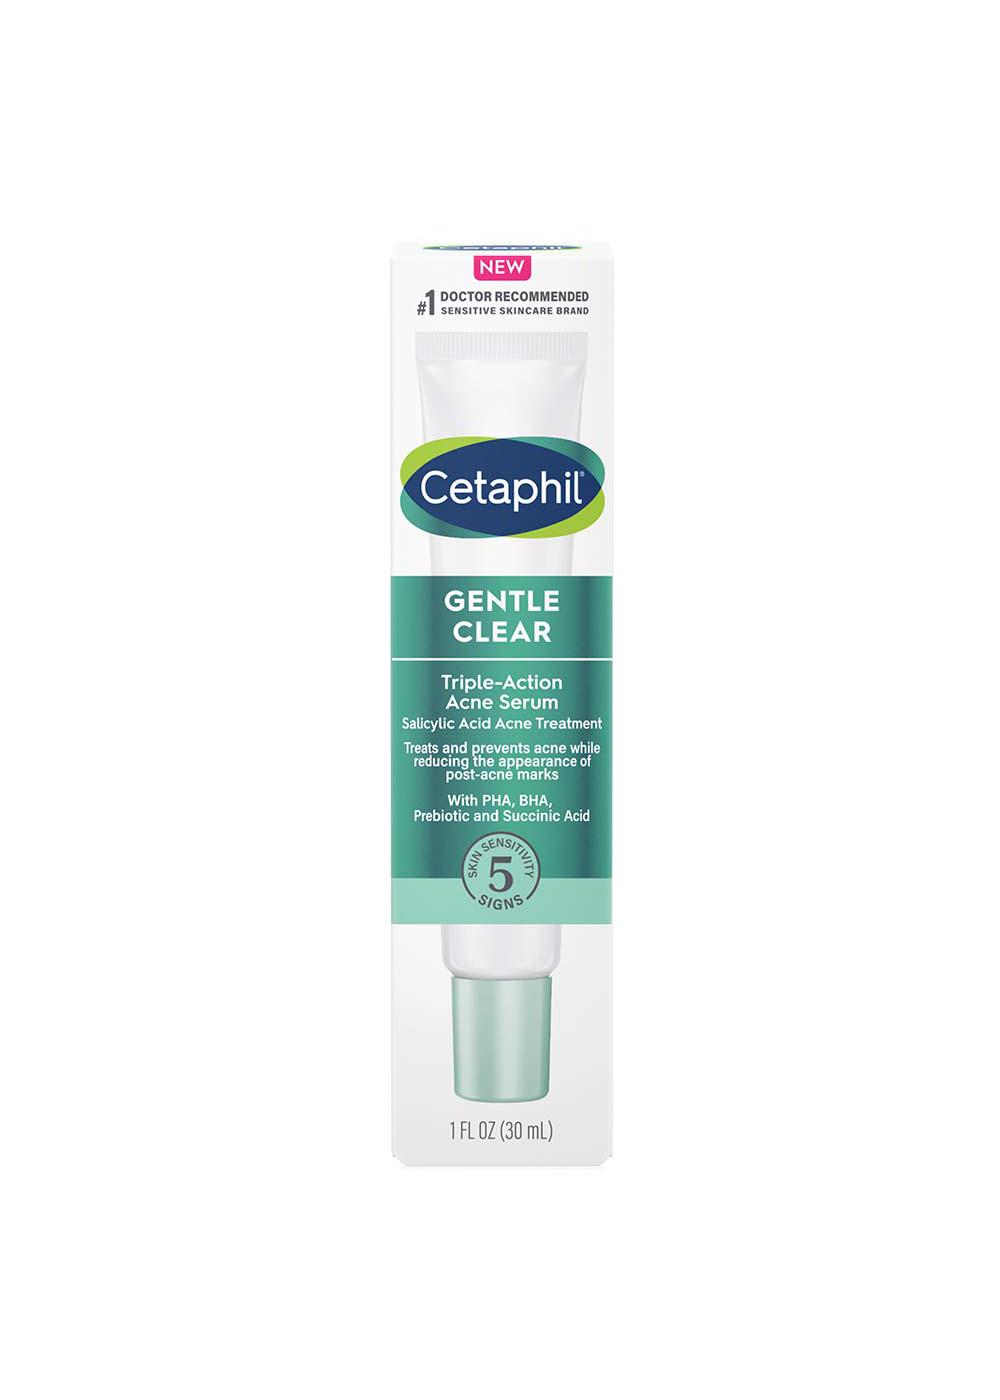 Cetaphil Gentle Clear Triple-Action Acne Serum - Shop Facial Cleansers & Scrubs at